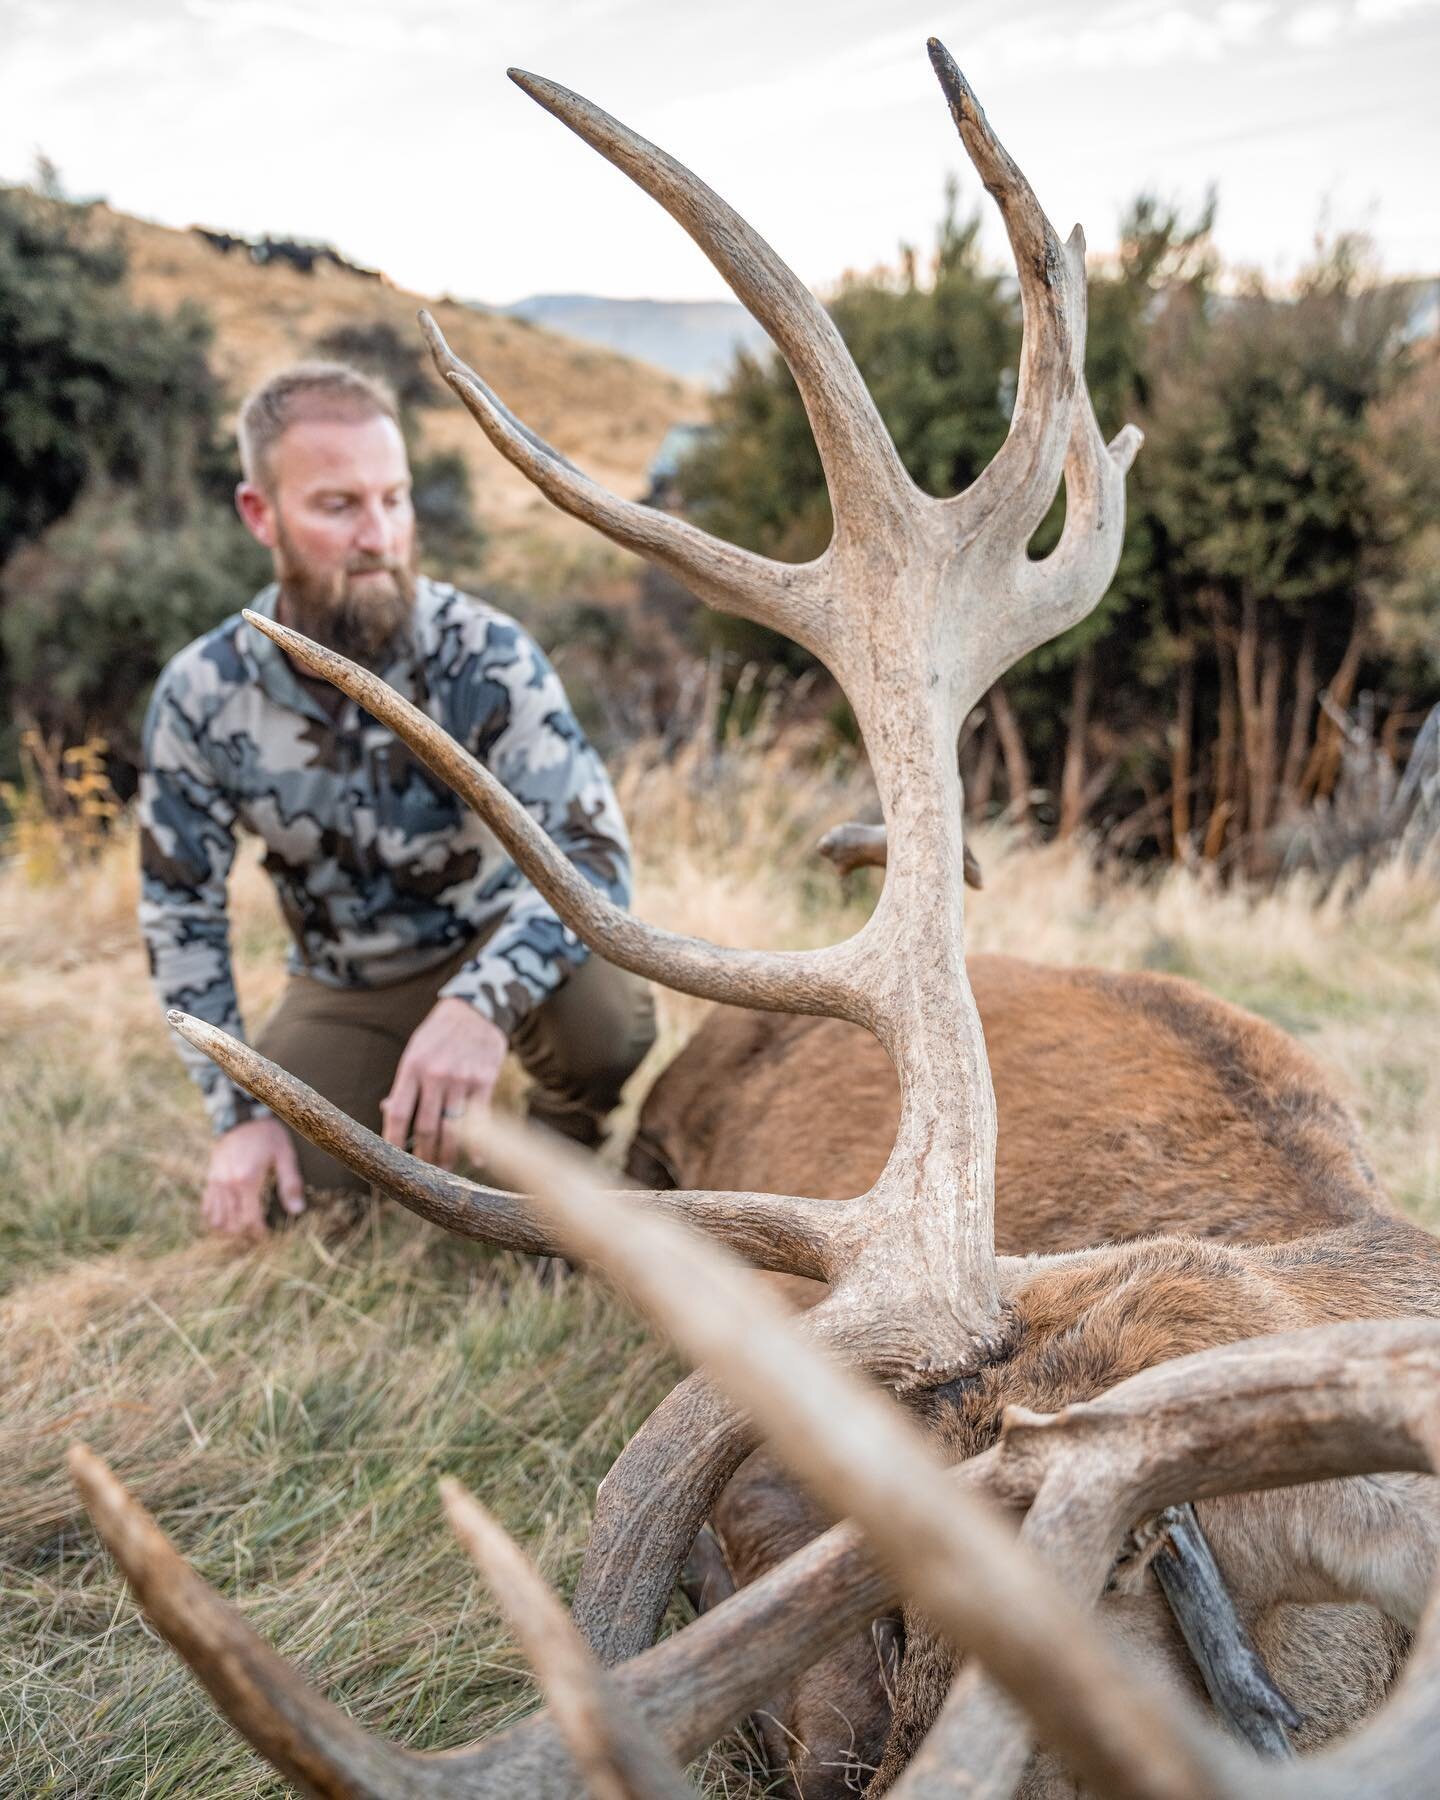 The thrill of the hunt&hellip; a beautiful stag taken this week with photos by guide @joe.fluerty 

#exclusiveadventuresnz #newzealand #newzealandhunting #huntnewzealand #redstag #redstaghunting #kuiu #kuiunation #whatgetsyououtdoors #deerhunting #de